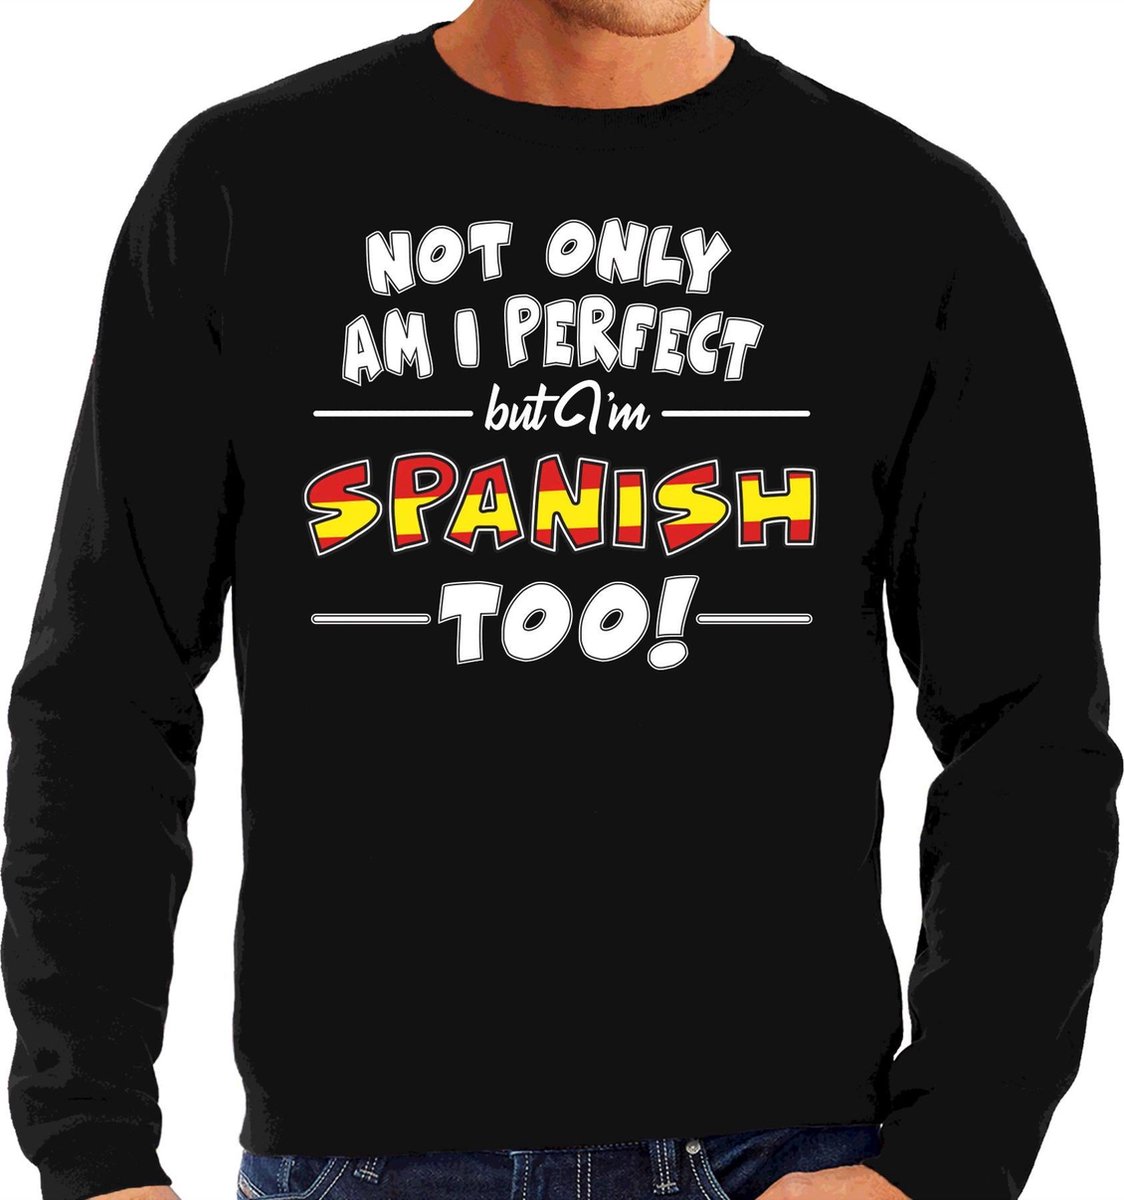 Not only am I perfect but im Spanish / Spaans too sweater - heren - zwart - Spanje cadeau trui L